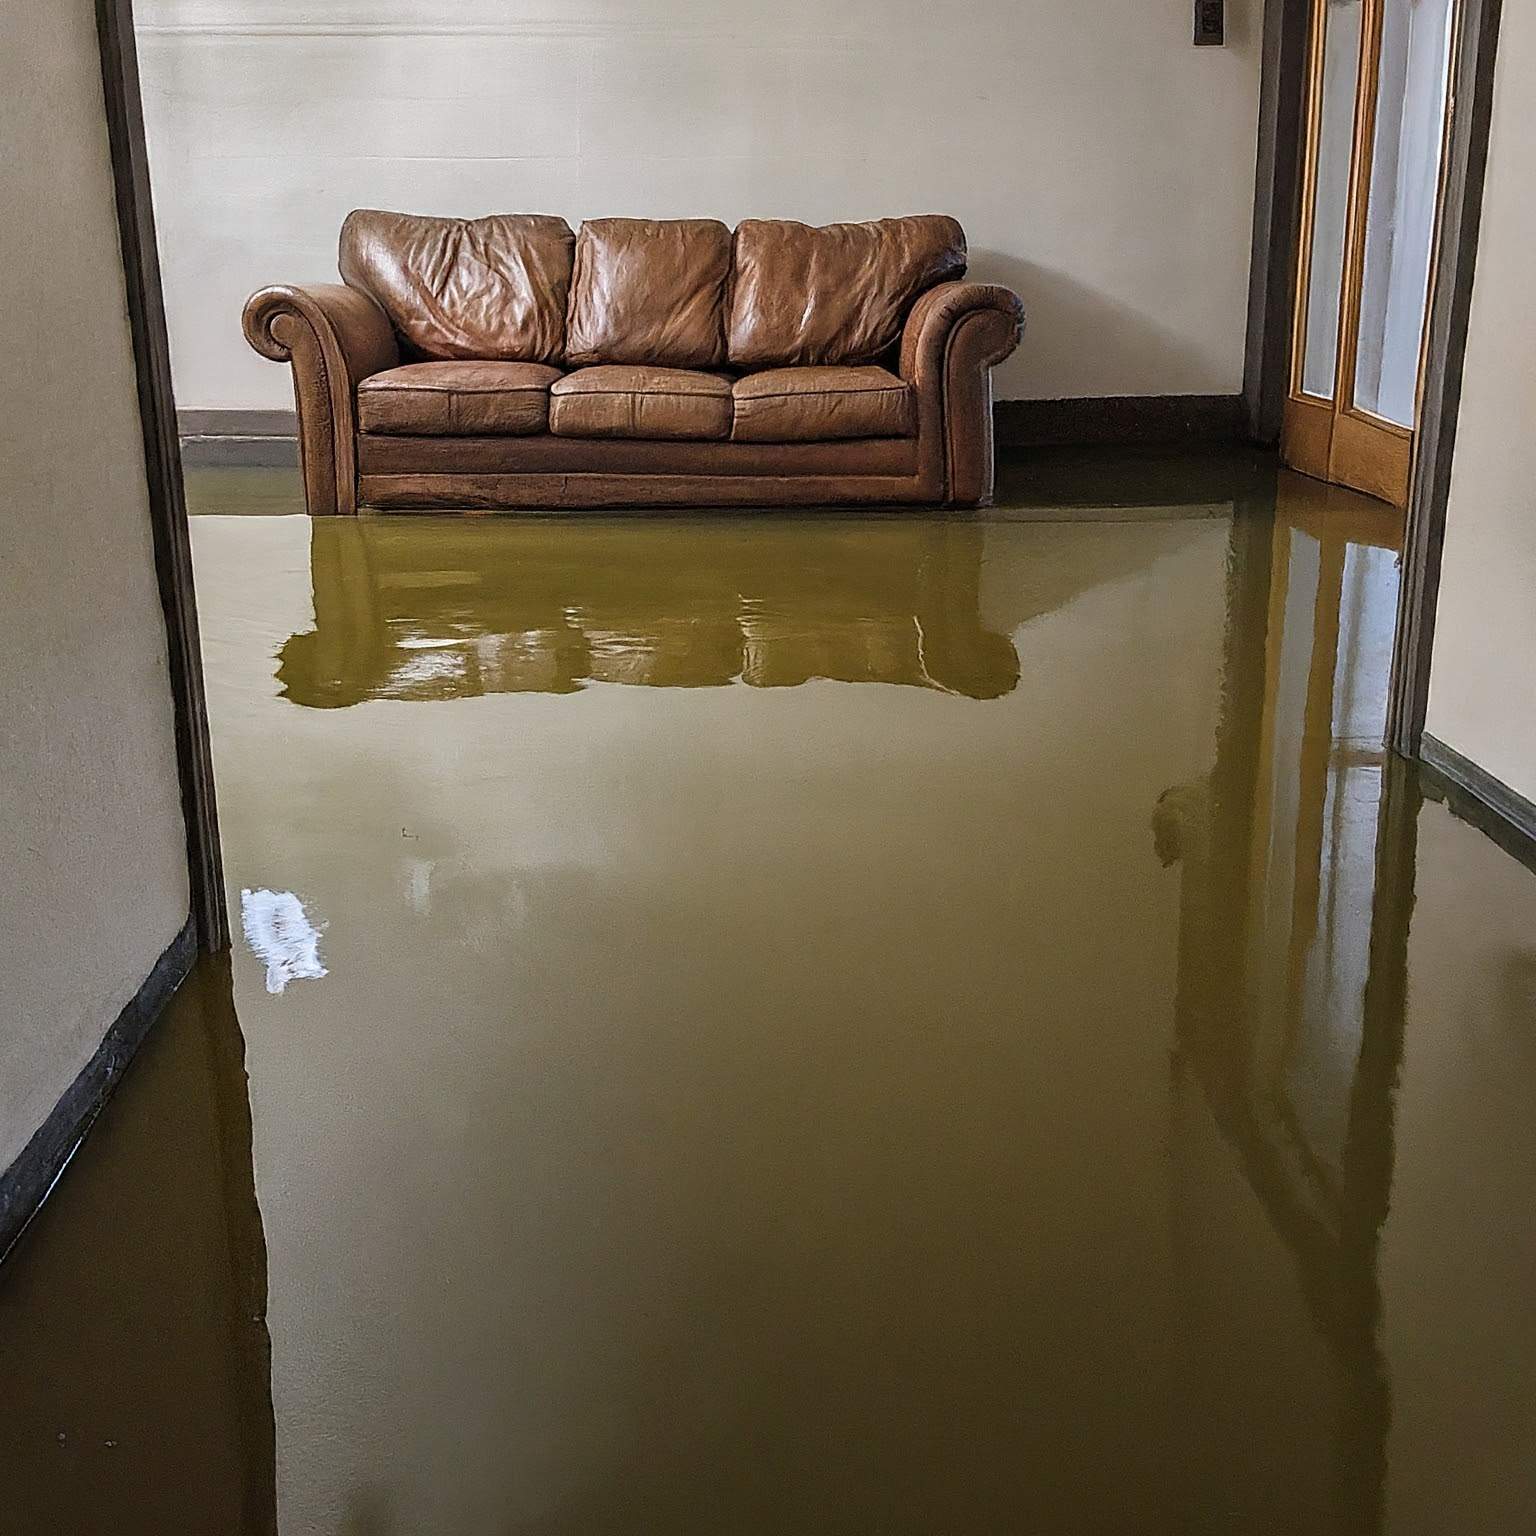 Flooded Basement Nightmare Due to Improper Window Well Drainage